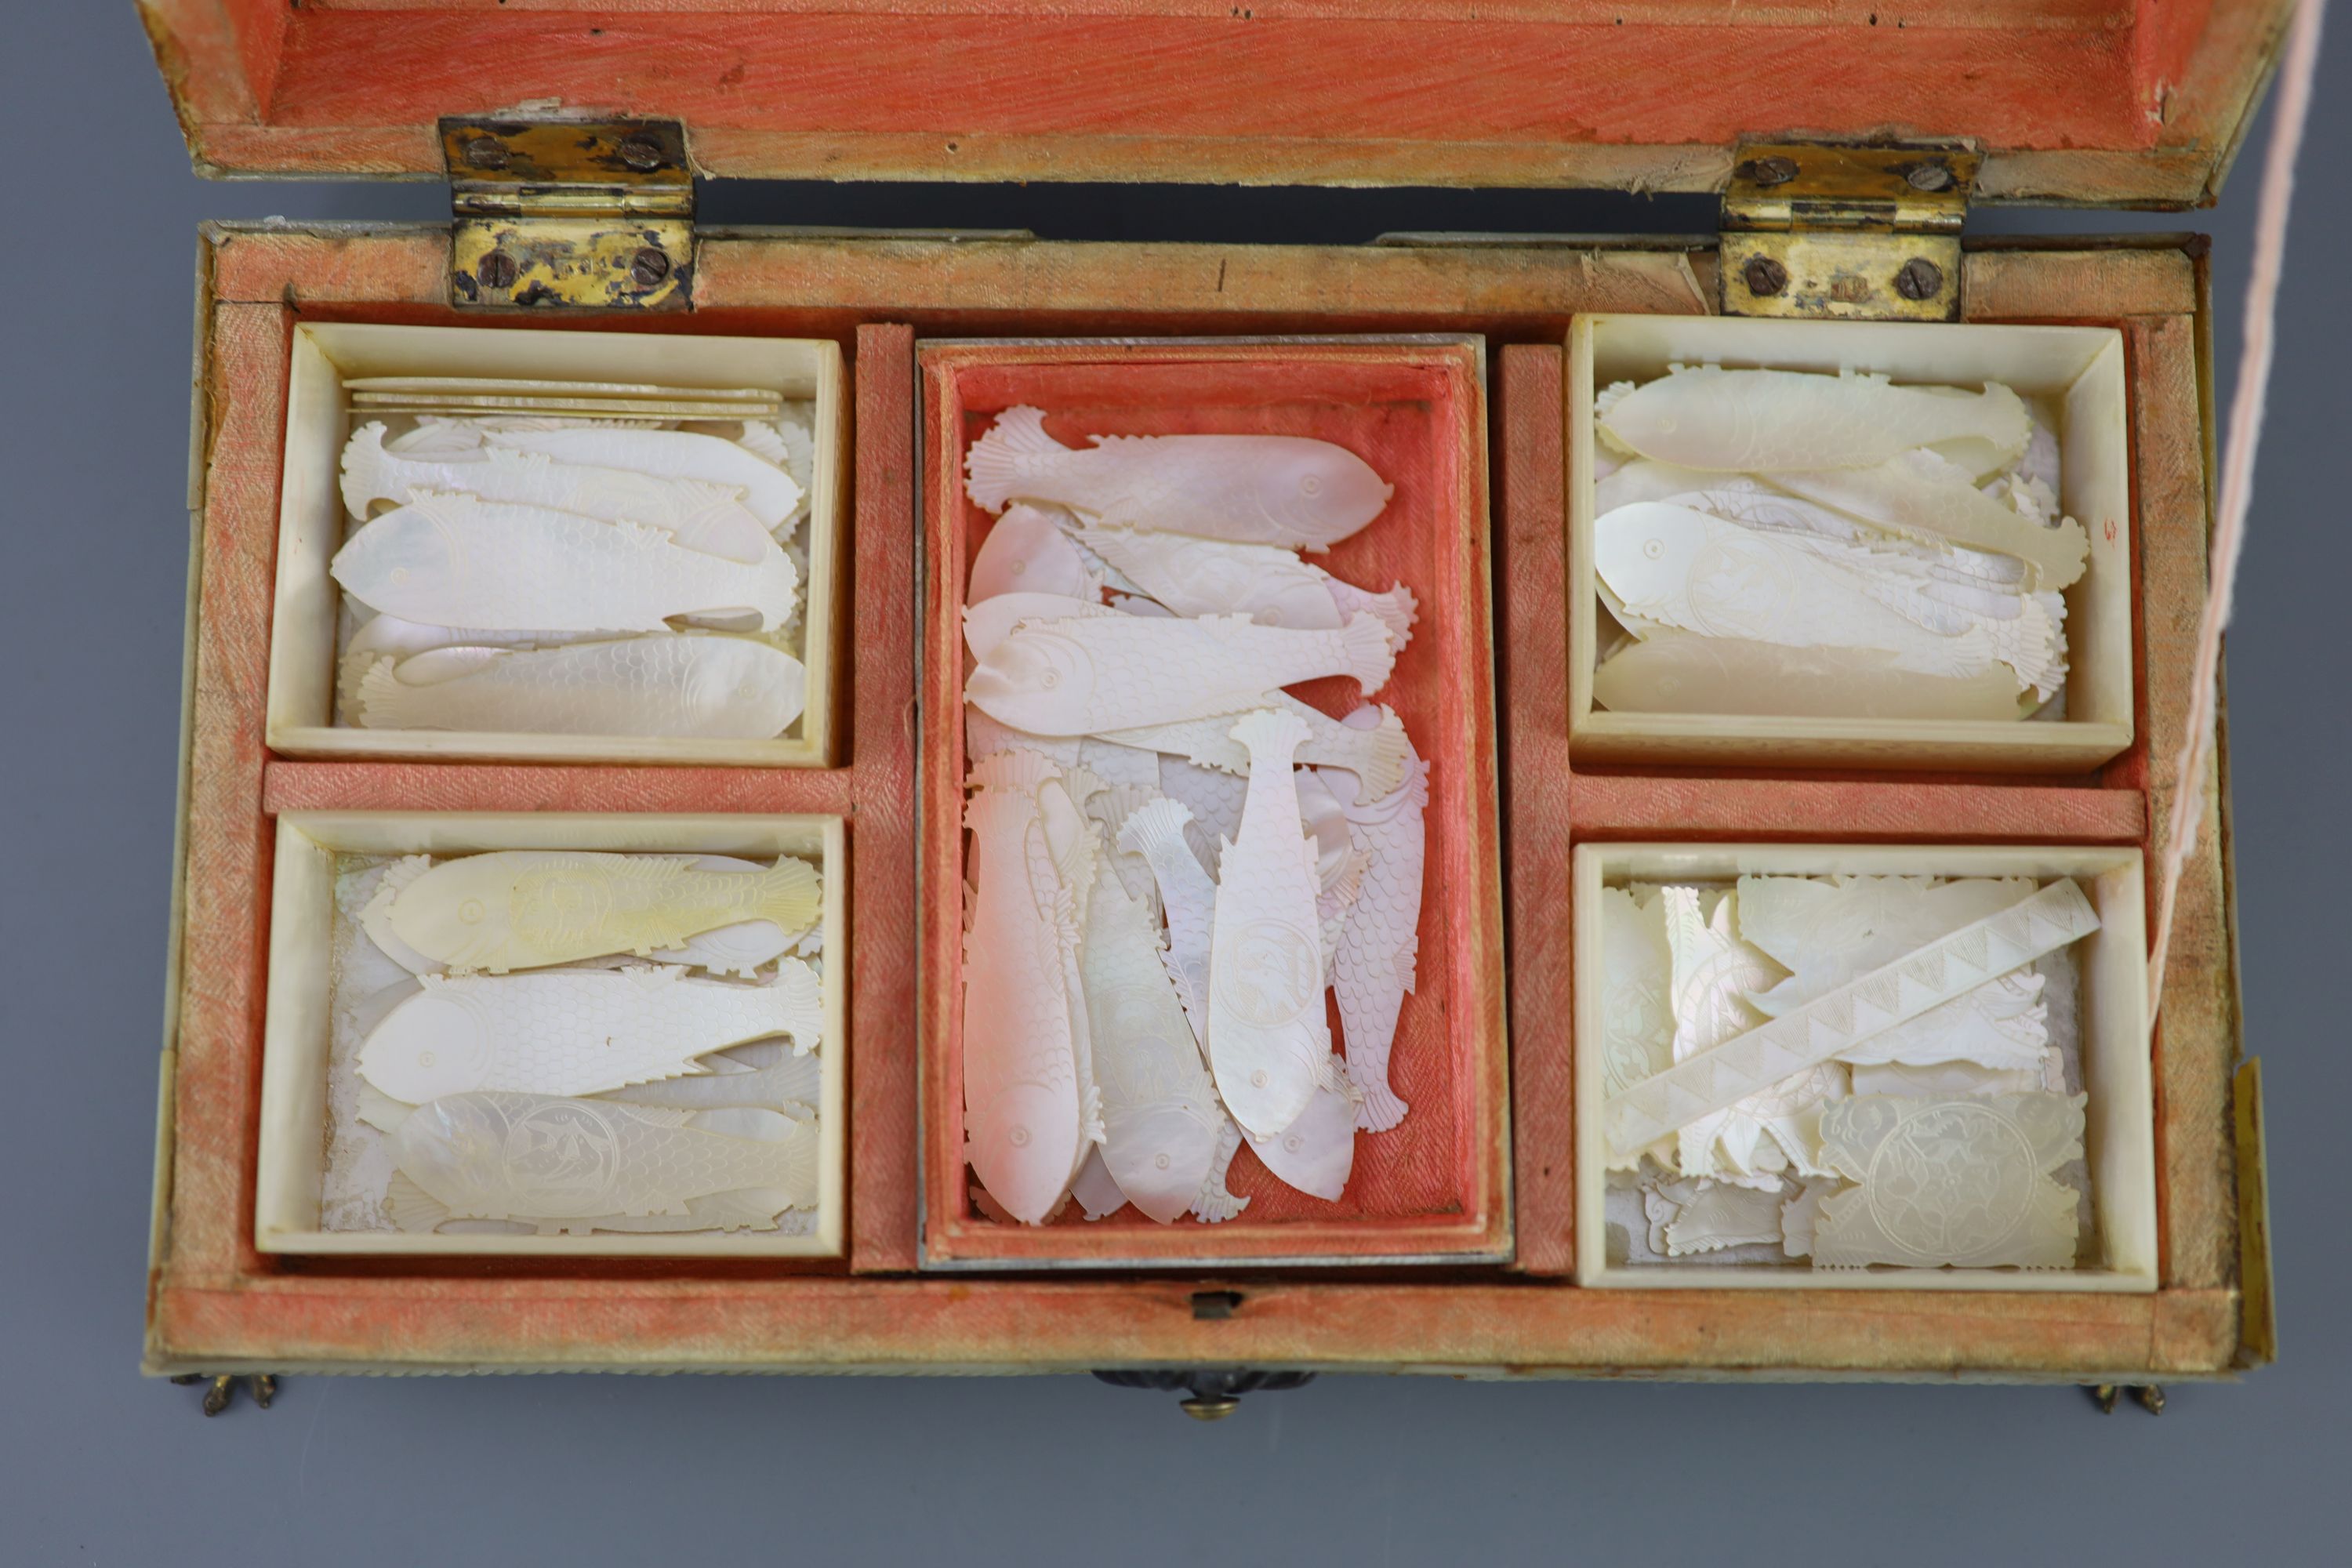 A Cantonese mother of pearl gaming box, mid 19th century, 27cm wide, sections detached